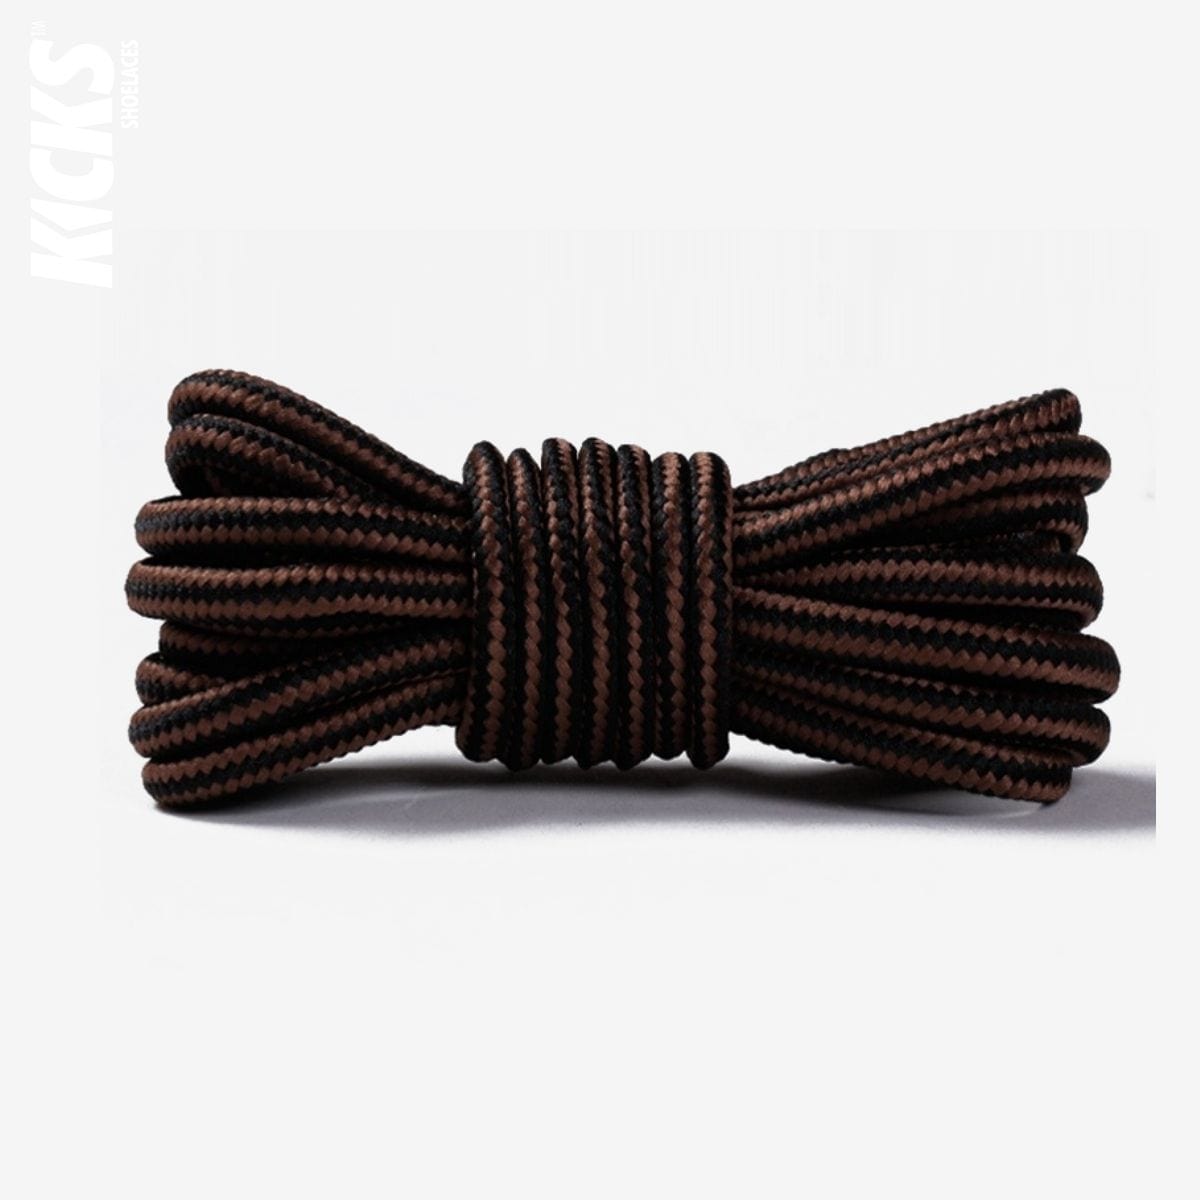 striped-two-color-shoelaces-for-casual-shoes-in-deep-brown-and-black